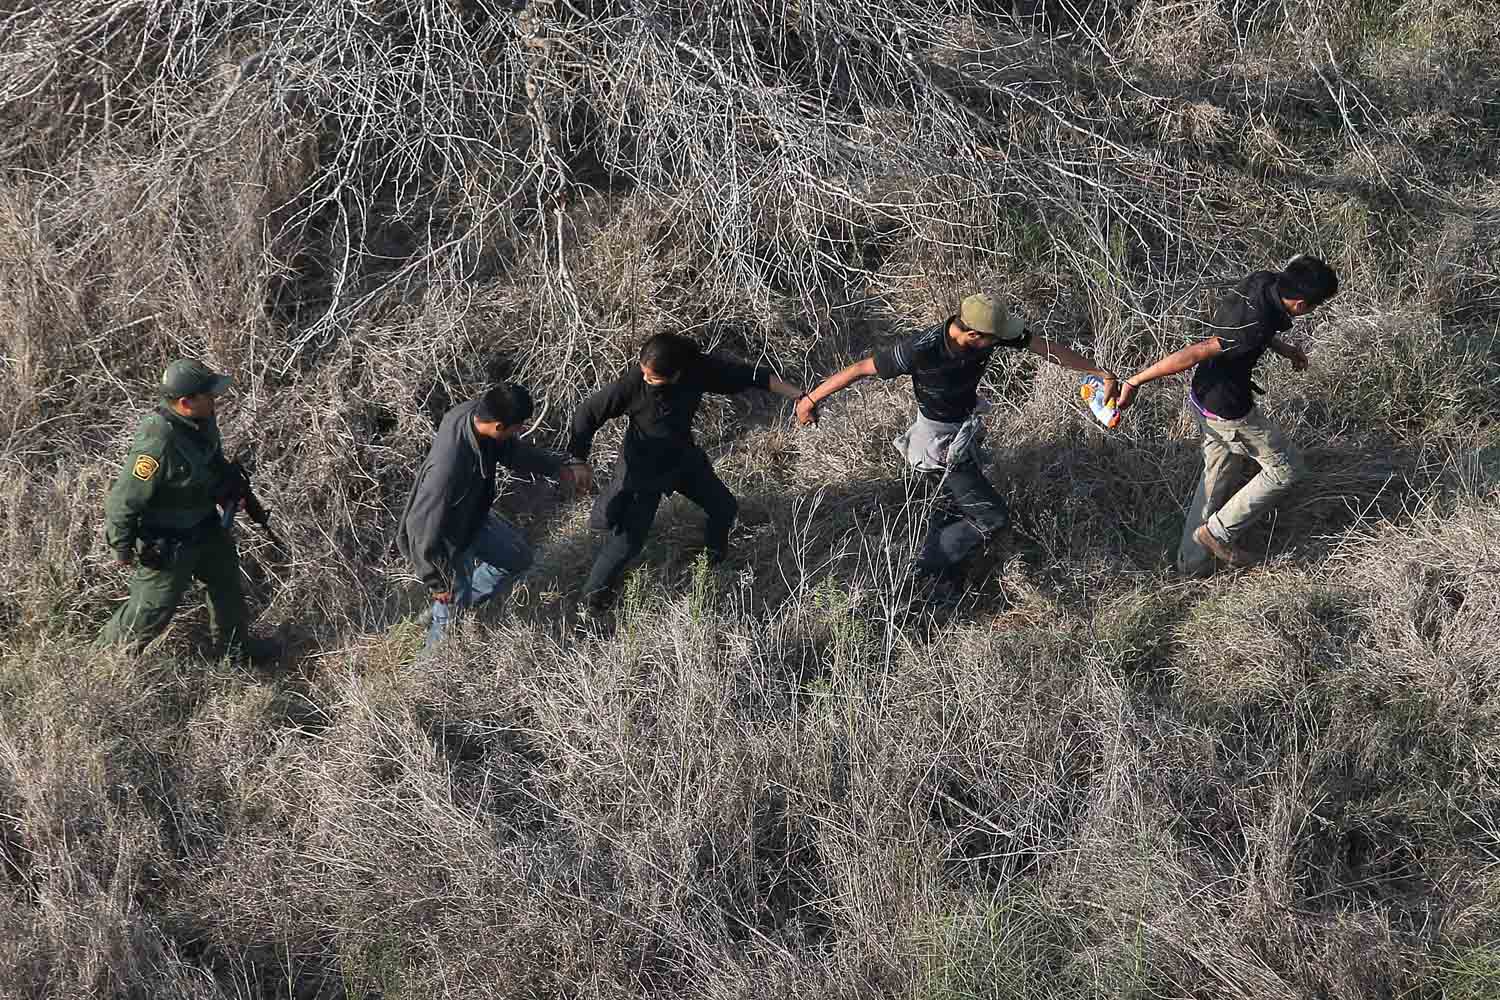 Customs And Border Protection Agents Detain Immigrants On Mexican Border